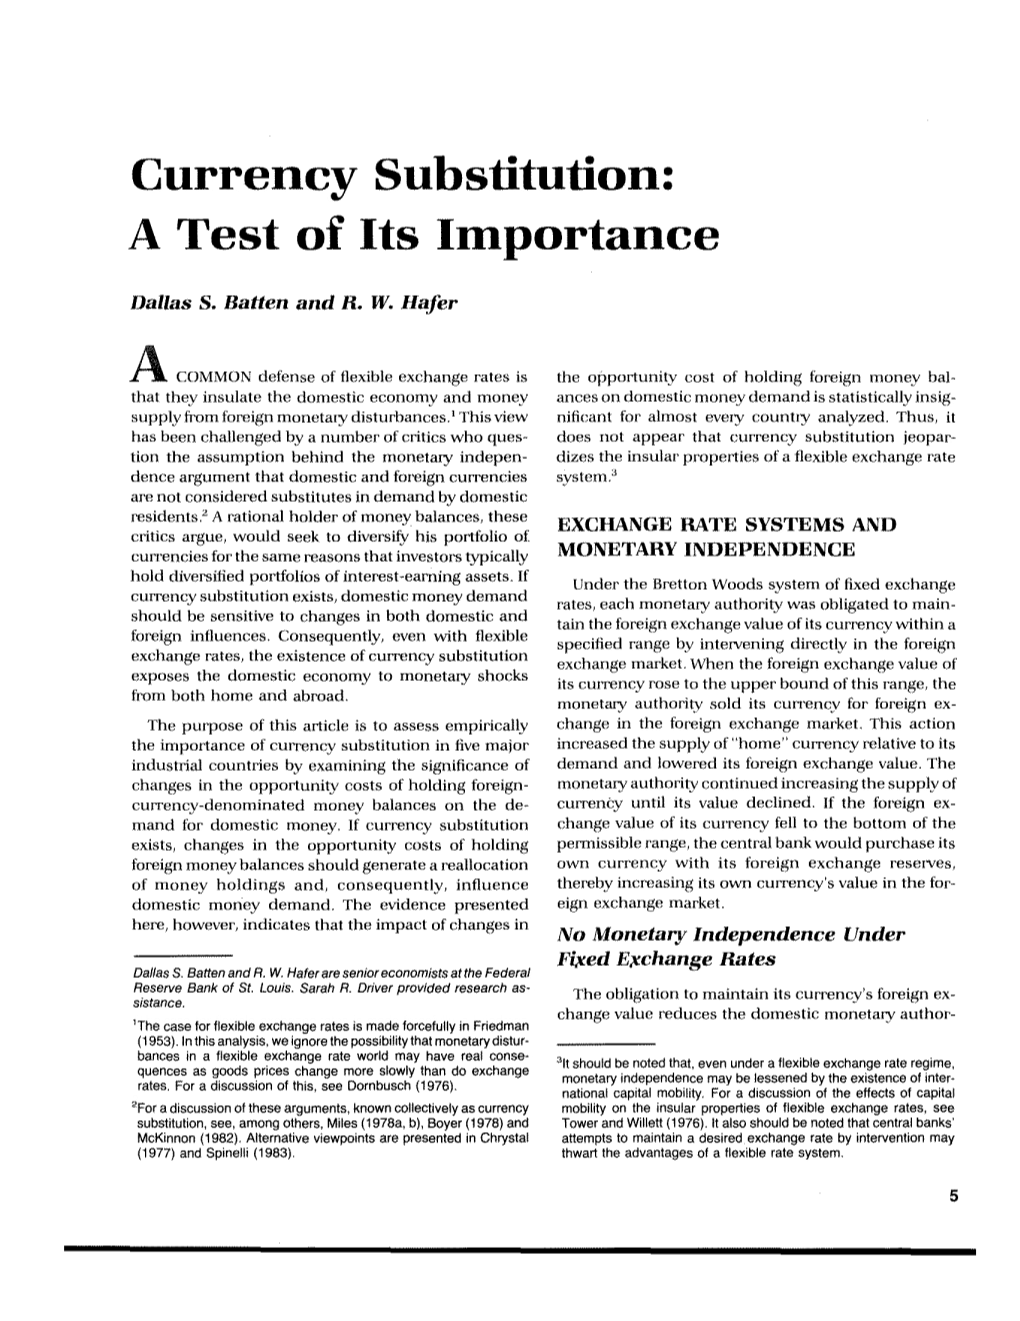 Currency Substitution: a Test of Its Importance